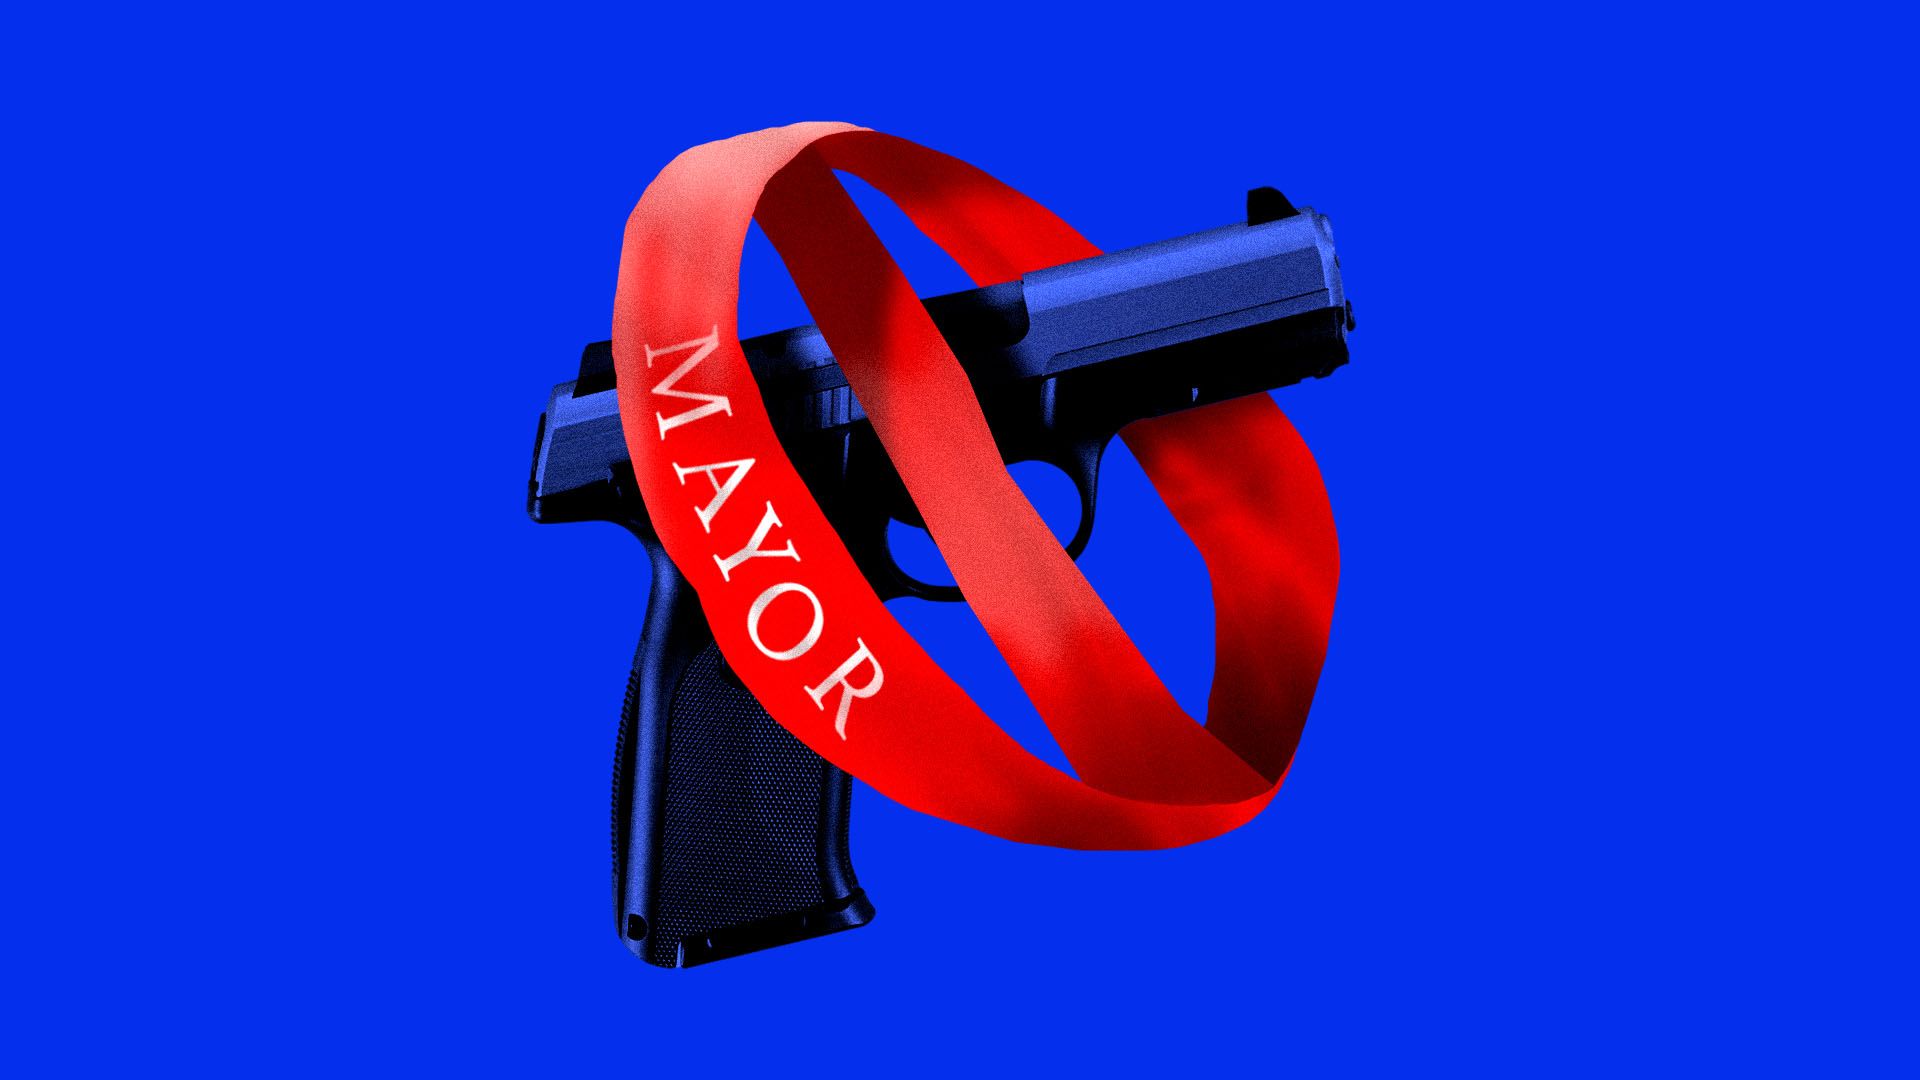 Illustration of a mayor's sash in the shape of a prohibition sign around a handgun 